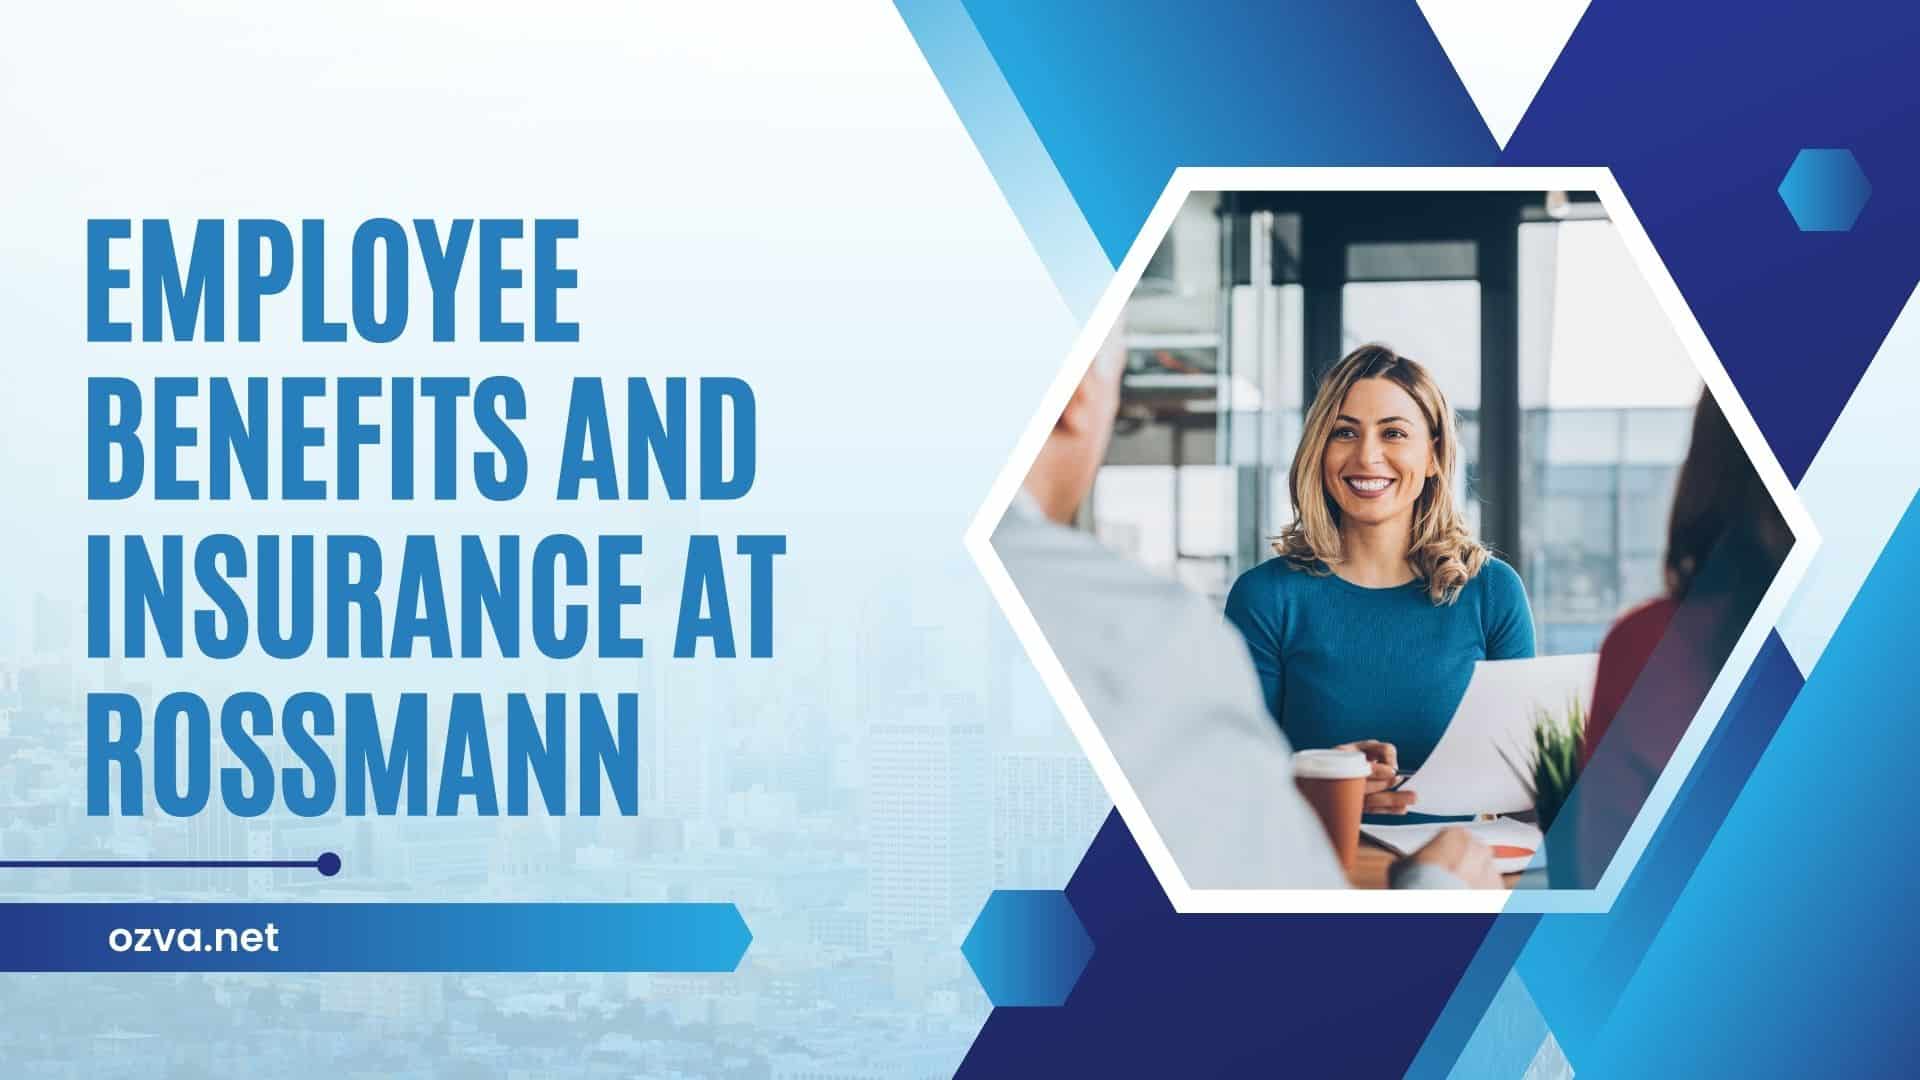 Employee Benefits and Insurance at Rossmann